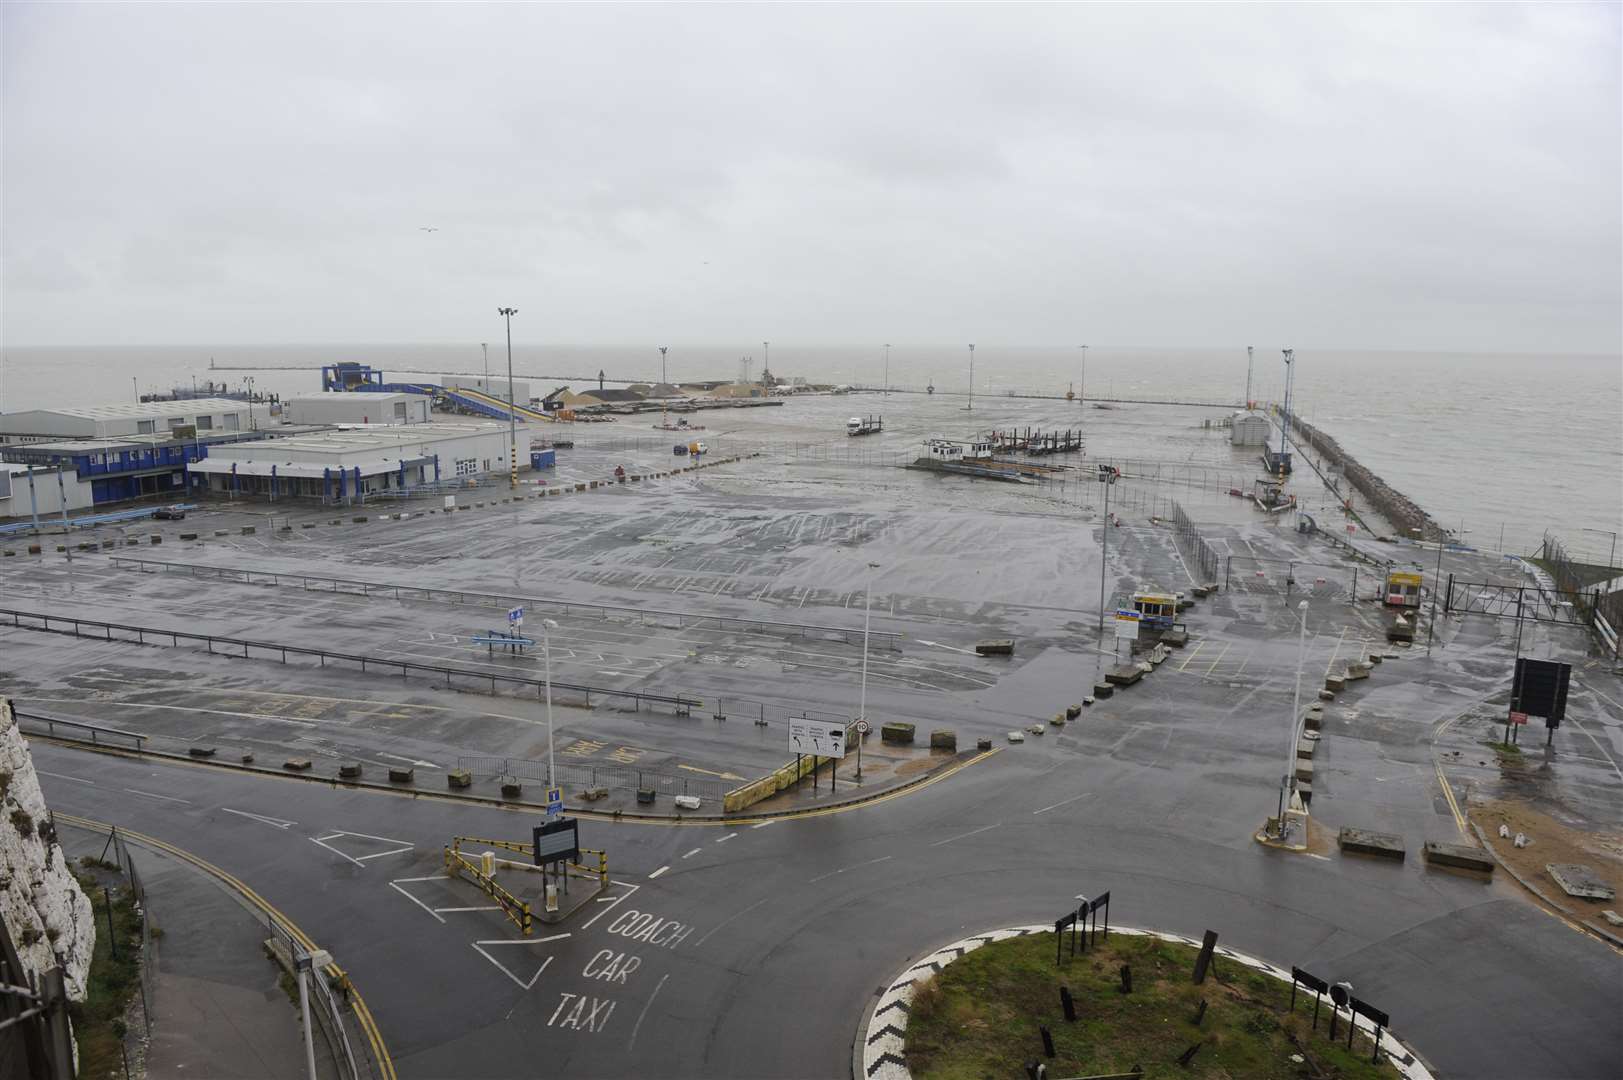 Thanet council have confirmed there is no agreement with Euroferries Express Ltd.